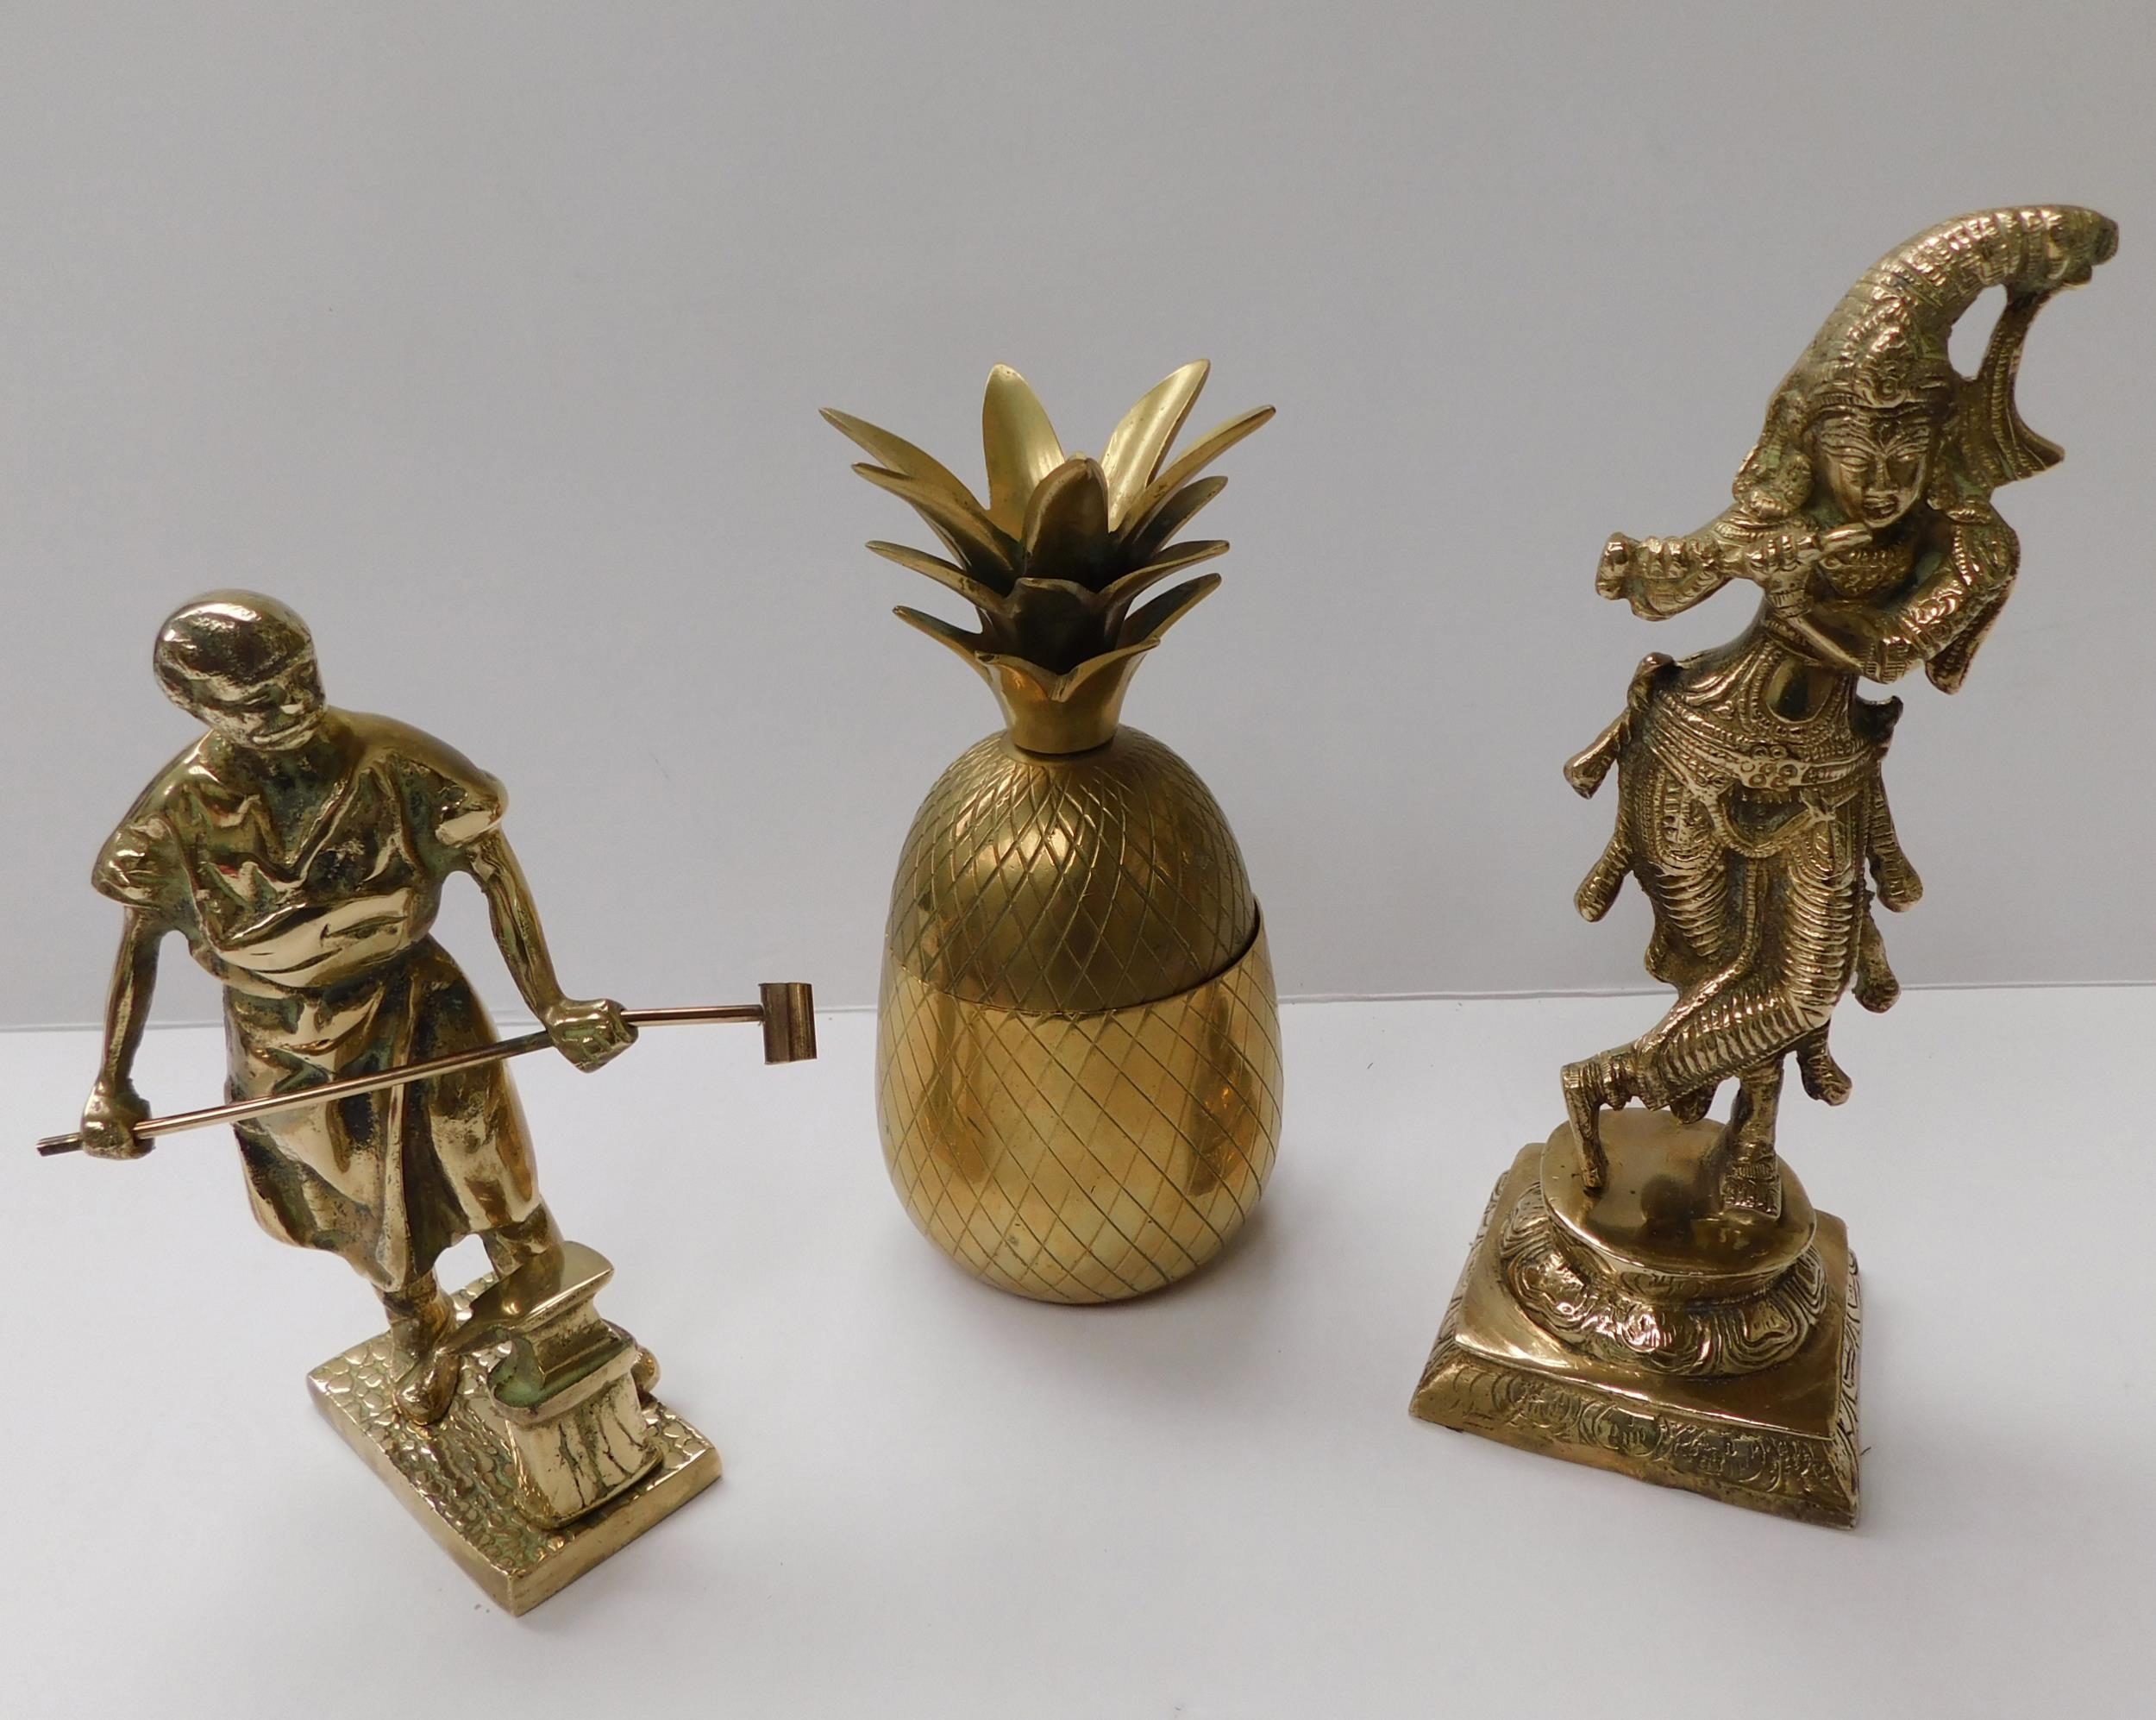 Brass Figurines & Miniatures for Sale at Auction, vintage brass